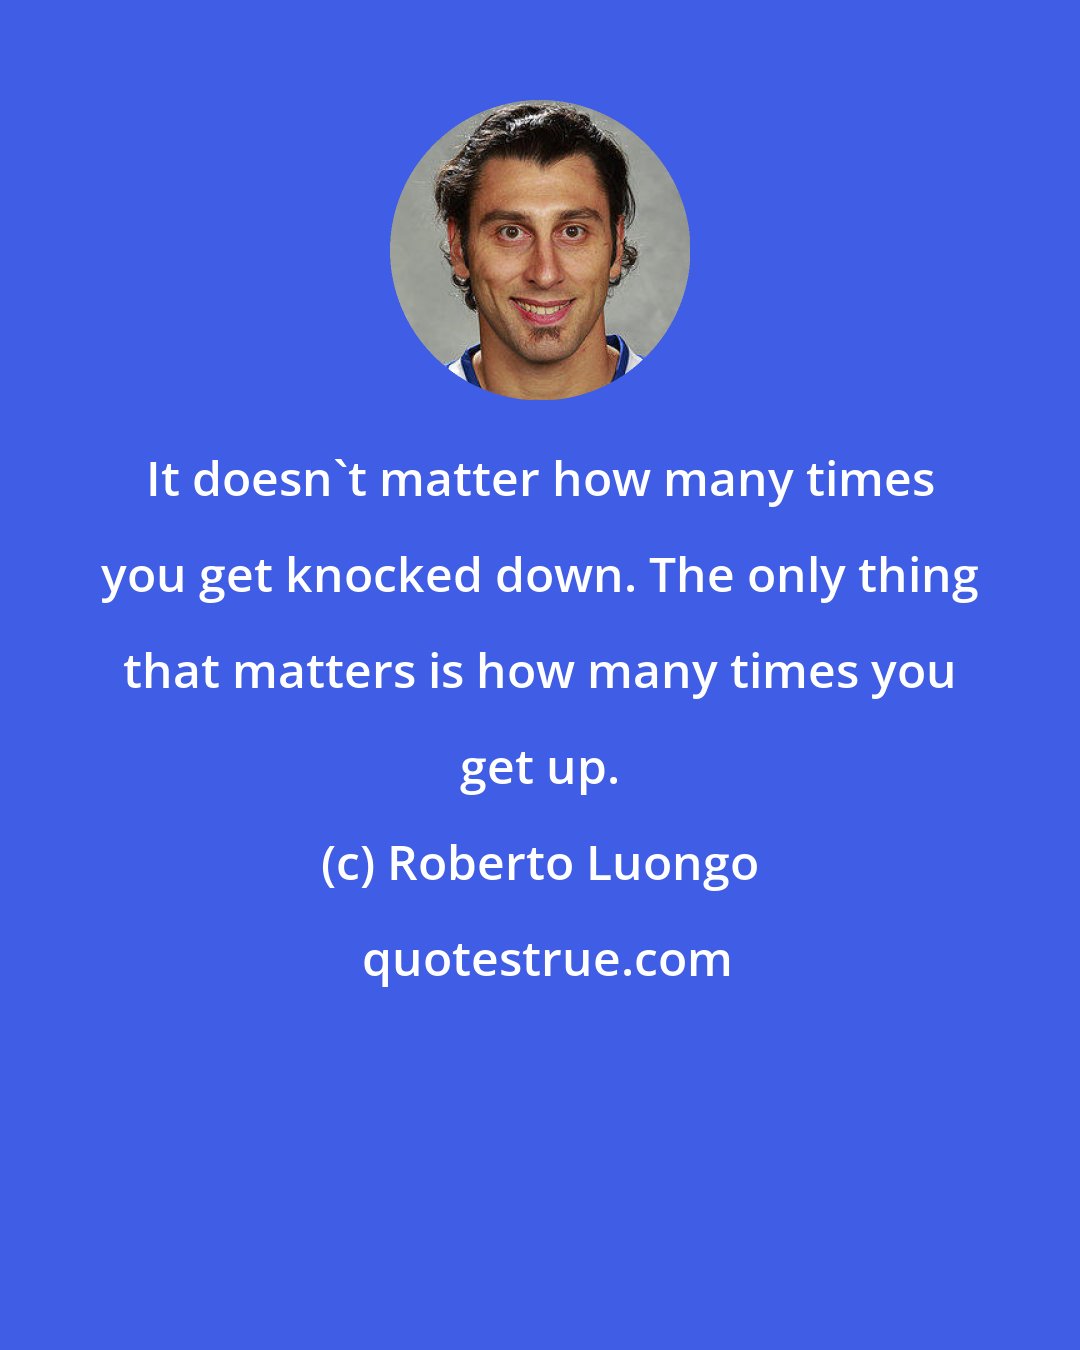 Roberto Luongo: It doesn't matter how many times you get knocked down. The only thing that matters is how many times you get up.